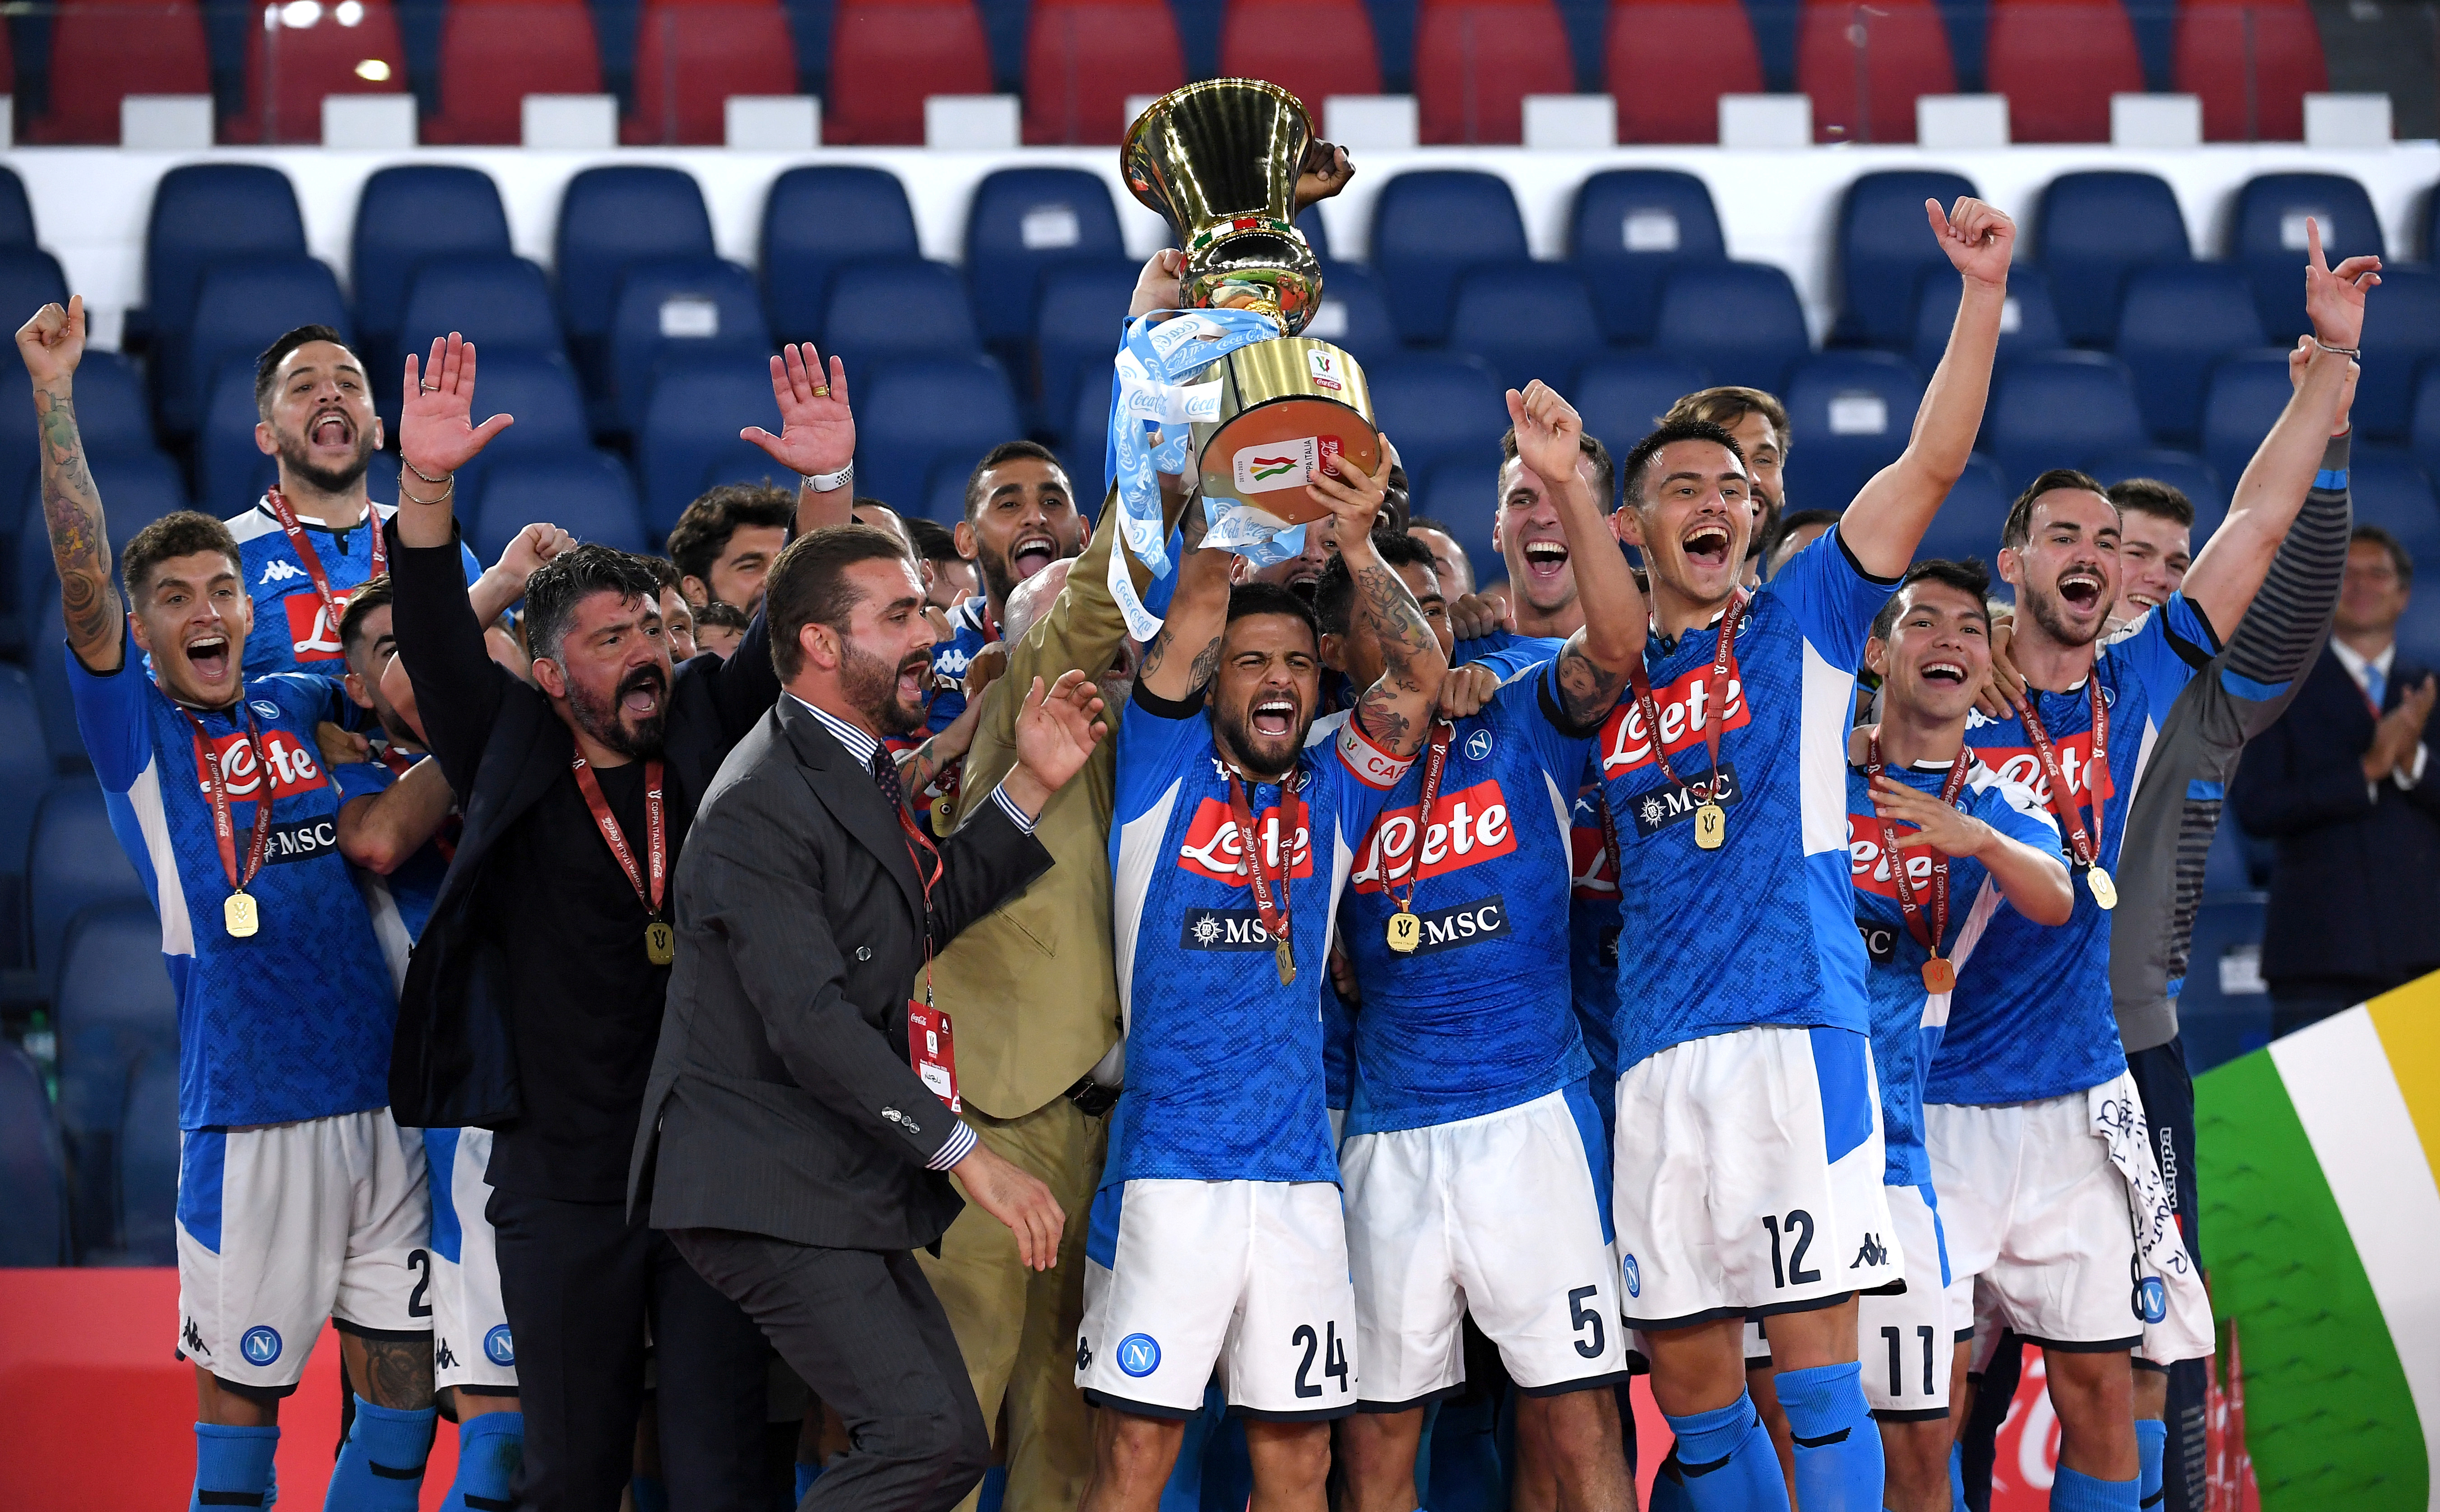 Napoli's Lorenzo Insigne celebrates with the trophy after winning the Coppa Italia with teammates, as play resumes behind closed doors following the outbreak of the coronavirus disease (COVID-19). Photo: Reuters